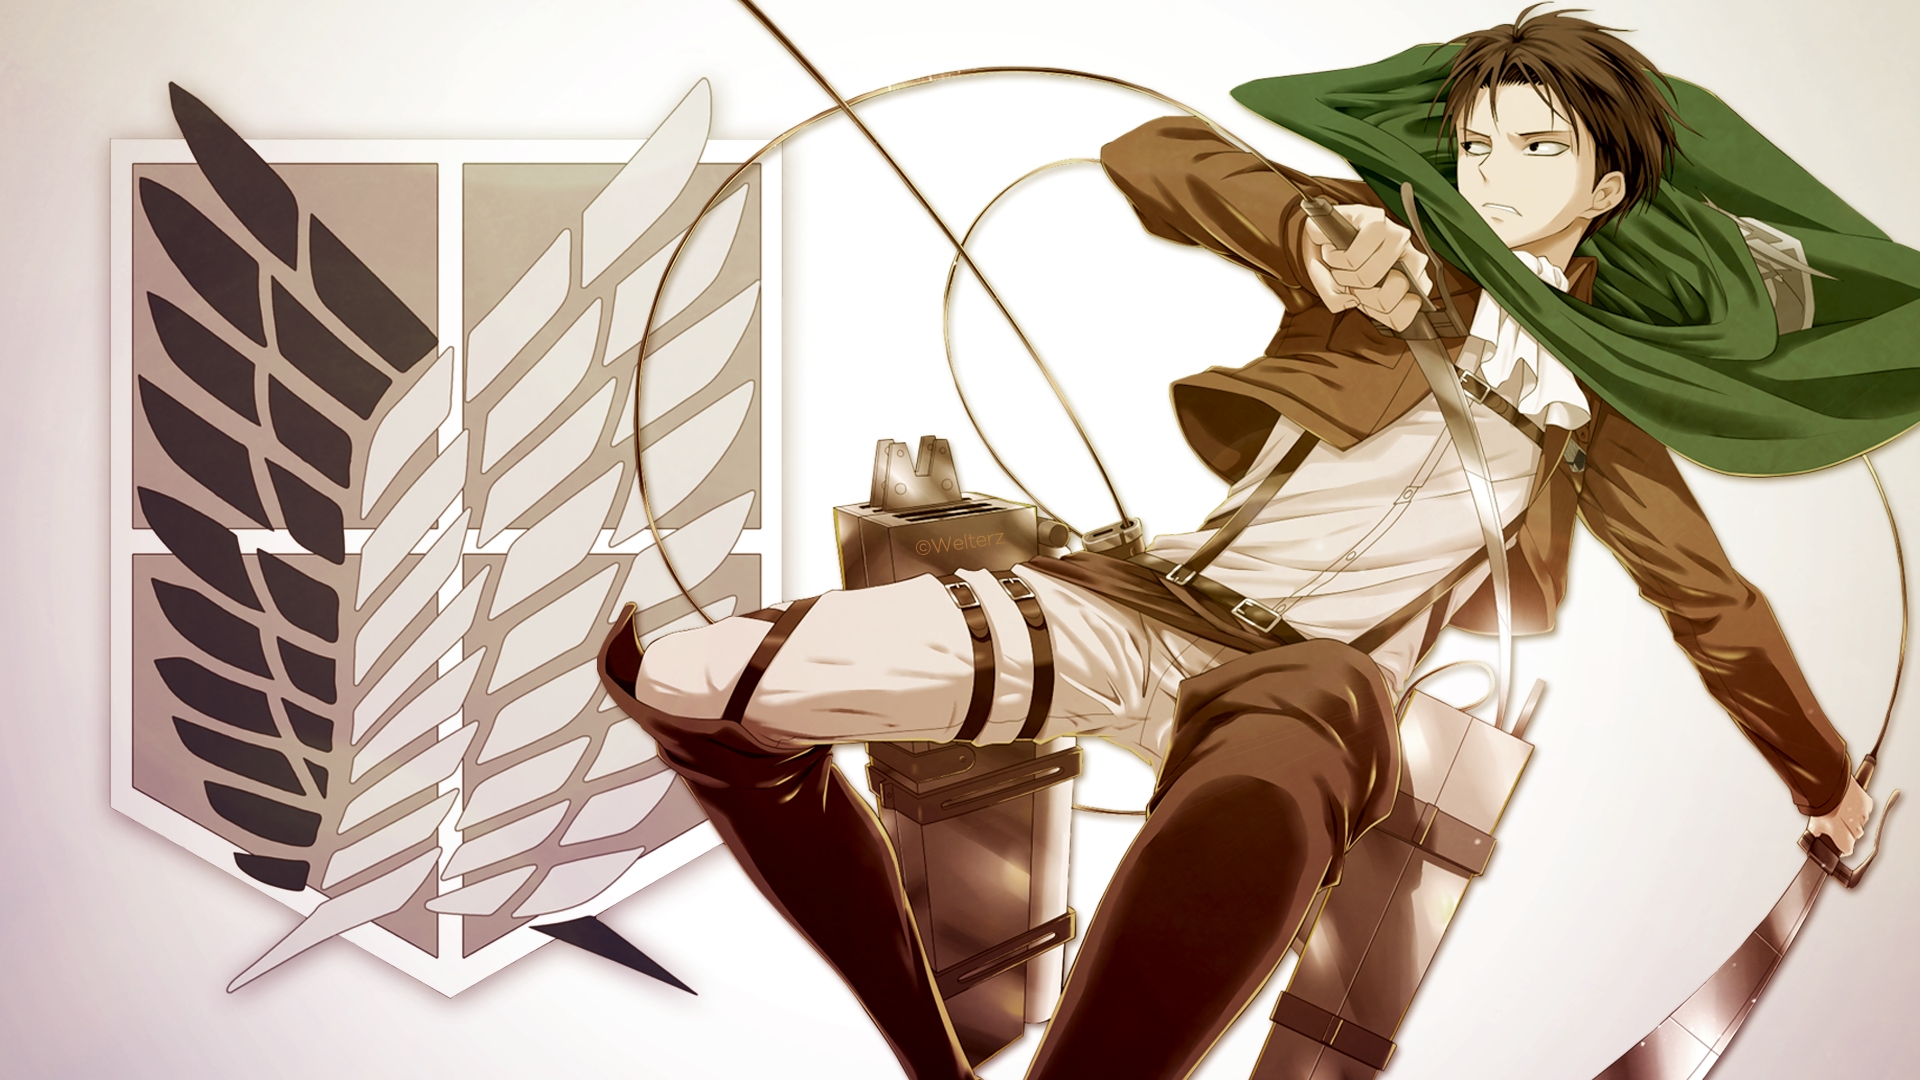 Attack On Titan Image Levi Ackerman HD Wallpaper And Background